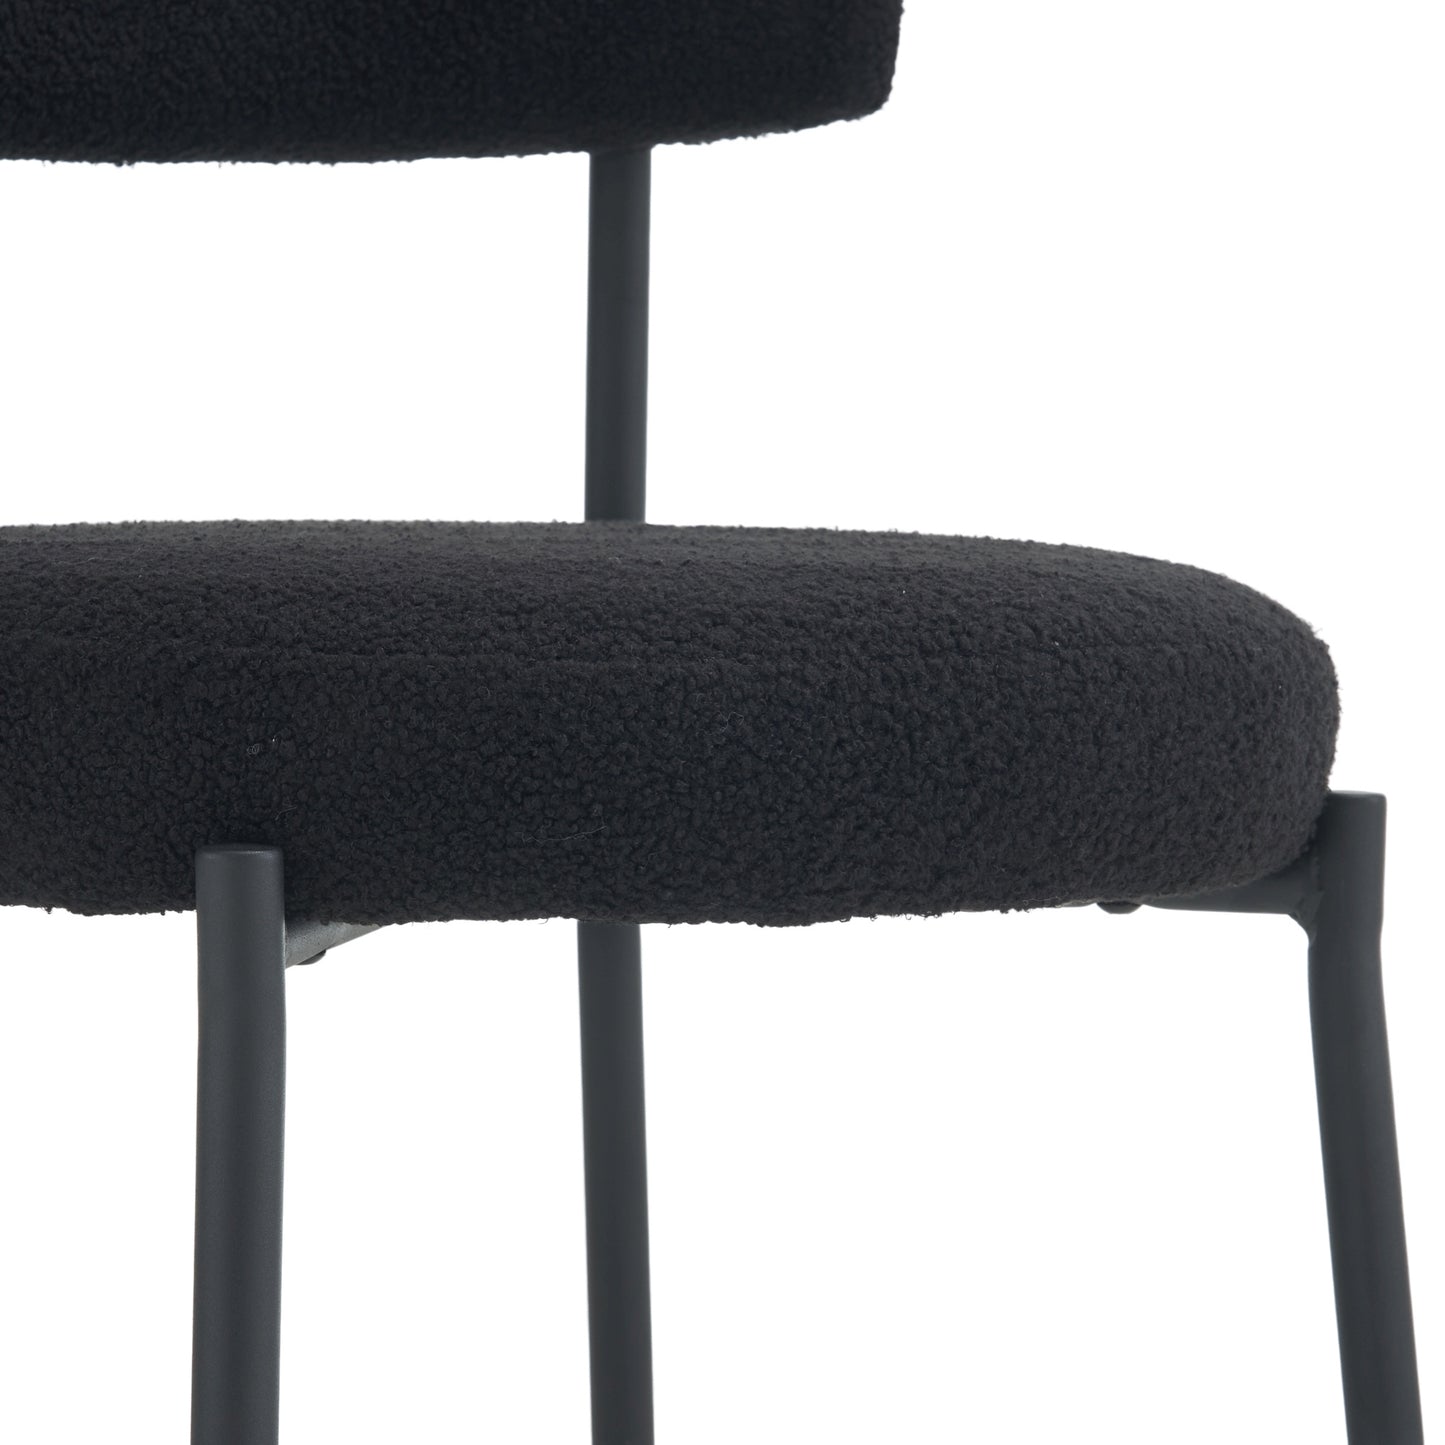 Set of 2 mid-century modern dining chairs - Teddy fabric upholstery - Curved back - Metal frame - Black | Elegant and comfortable kitchen chairs